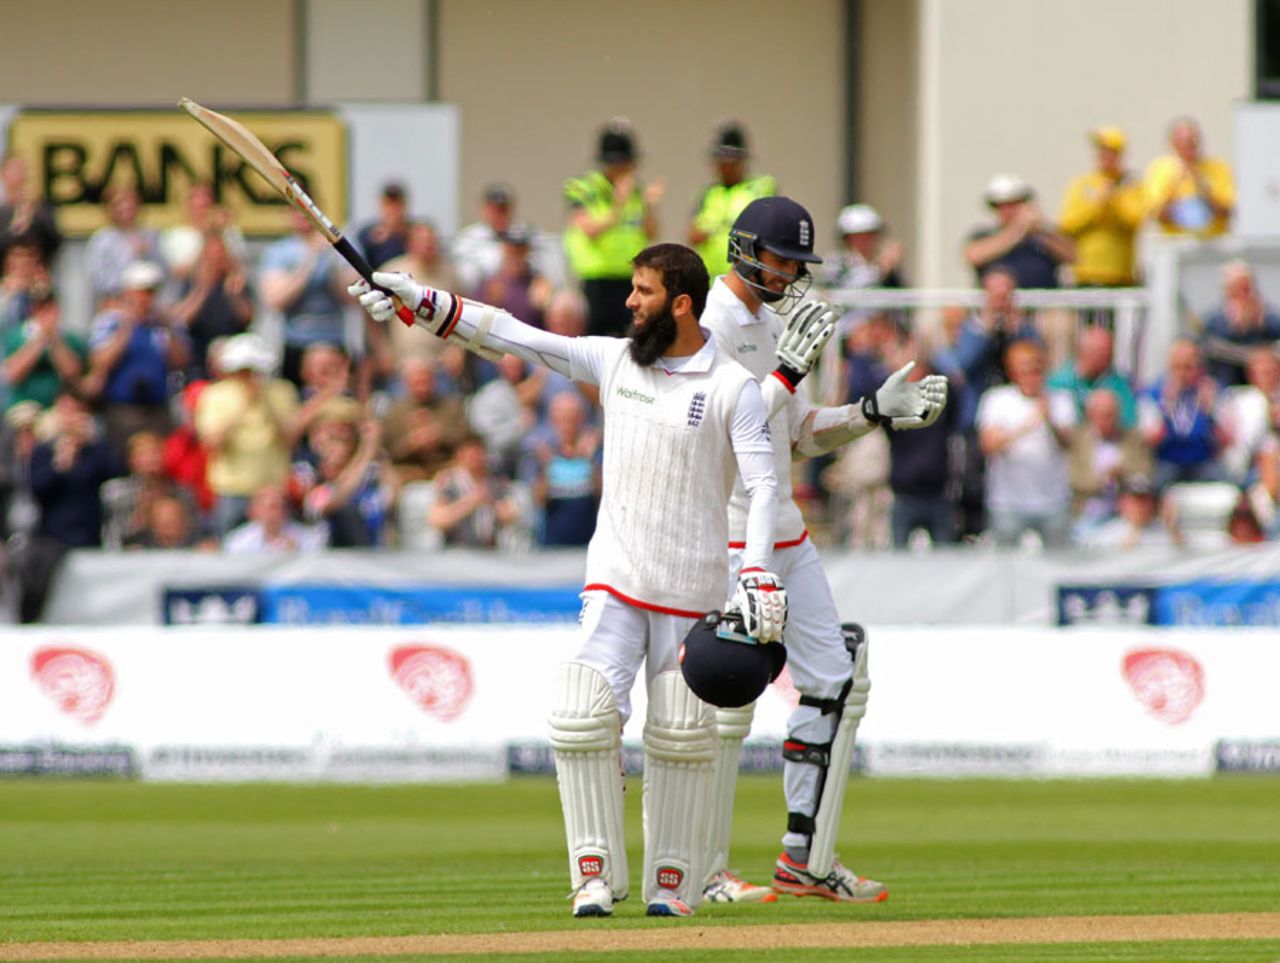 Moeen Ali's second Test hundred came two years after his first, England v Sri Lanka, 2nd Test, Chester-le-Street, 2nd day, May 28, 2016